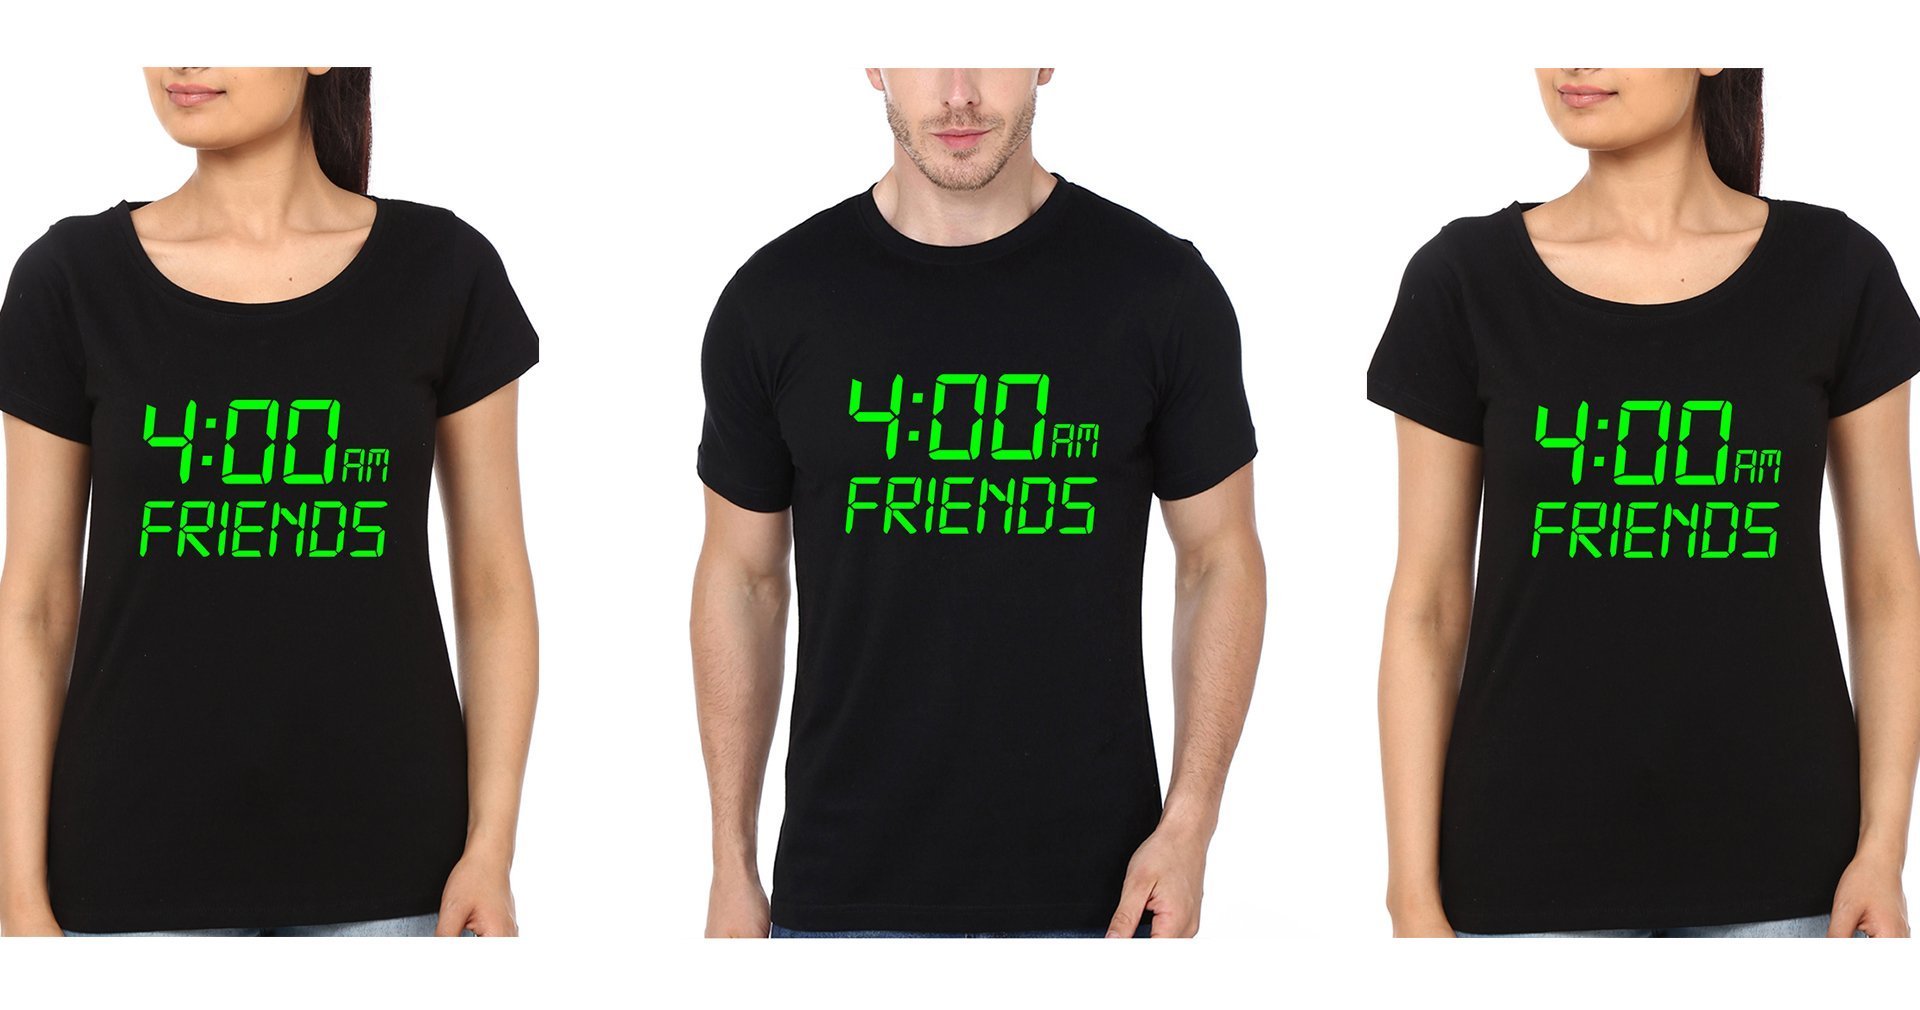 4Am Friends BFF Half Sleeves T-Shirts-FunkyTradition - FunkyTradition